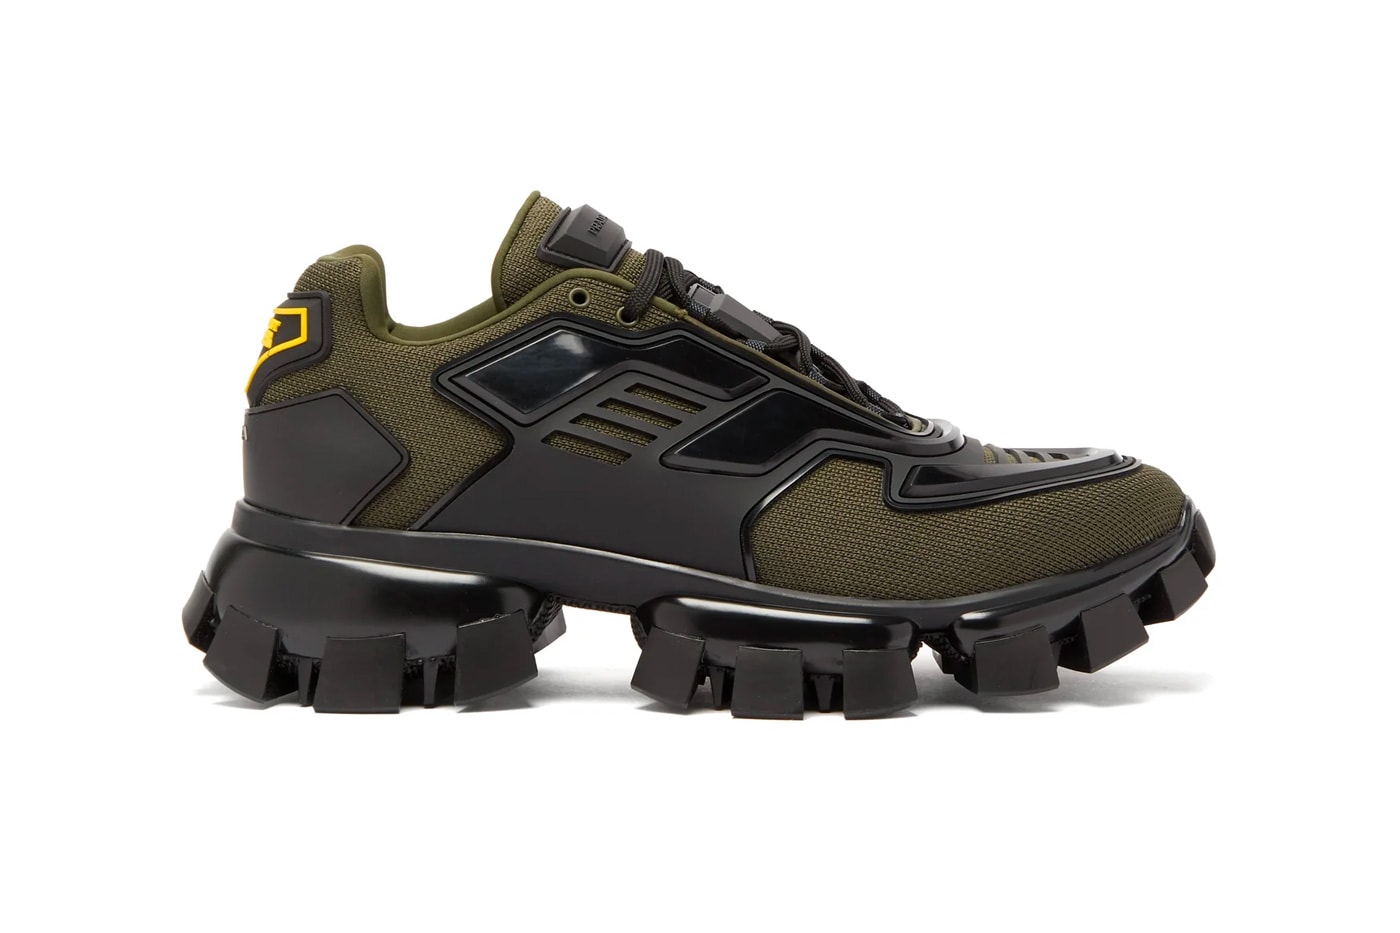 Prada Cloudbust Thunder Knitted Sneakers Release Info price drop date olive black matchesfashion.com buy now designer shoes trainers chunky treaded outsole fw19 fall/winter 2019 frankenstein